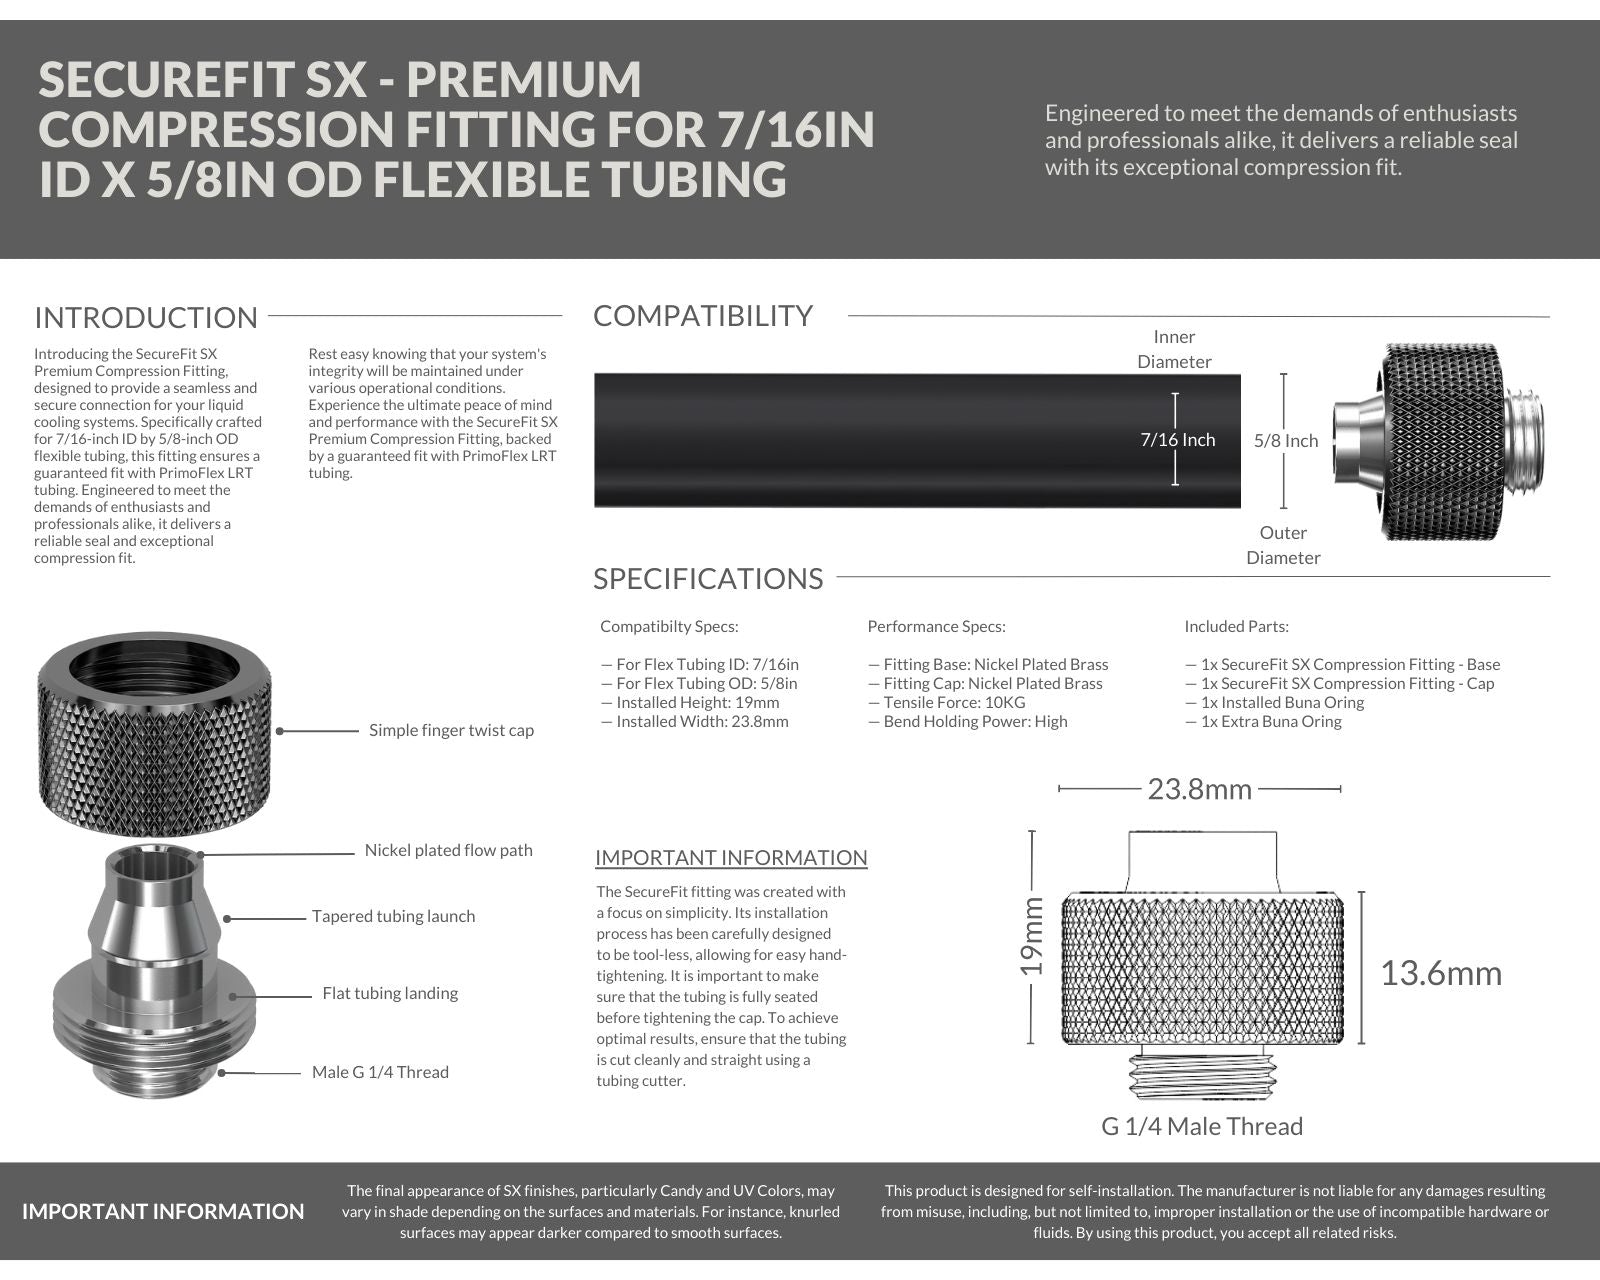 PrimoChill SecureFit SX - Premium Compression Fitting For 7/16in ID x 5/8in OD Flexible Tubing (F-SFSX758) - Available in 20+ Colors, Custom Watercooling Loop Ready - Dark Nickel